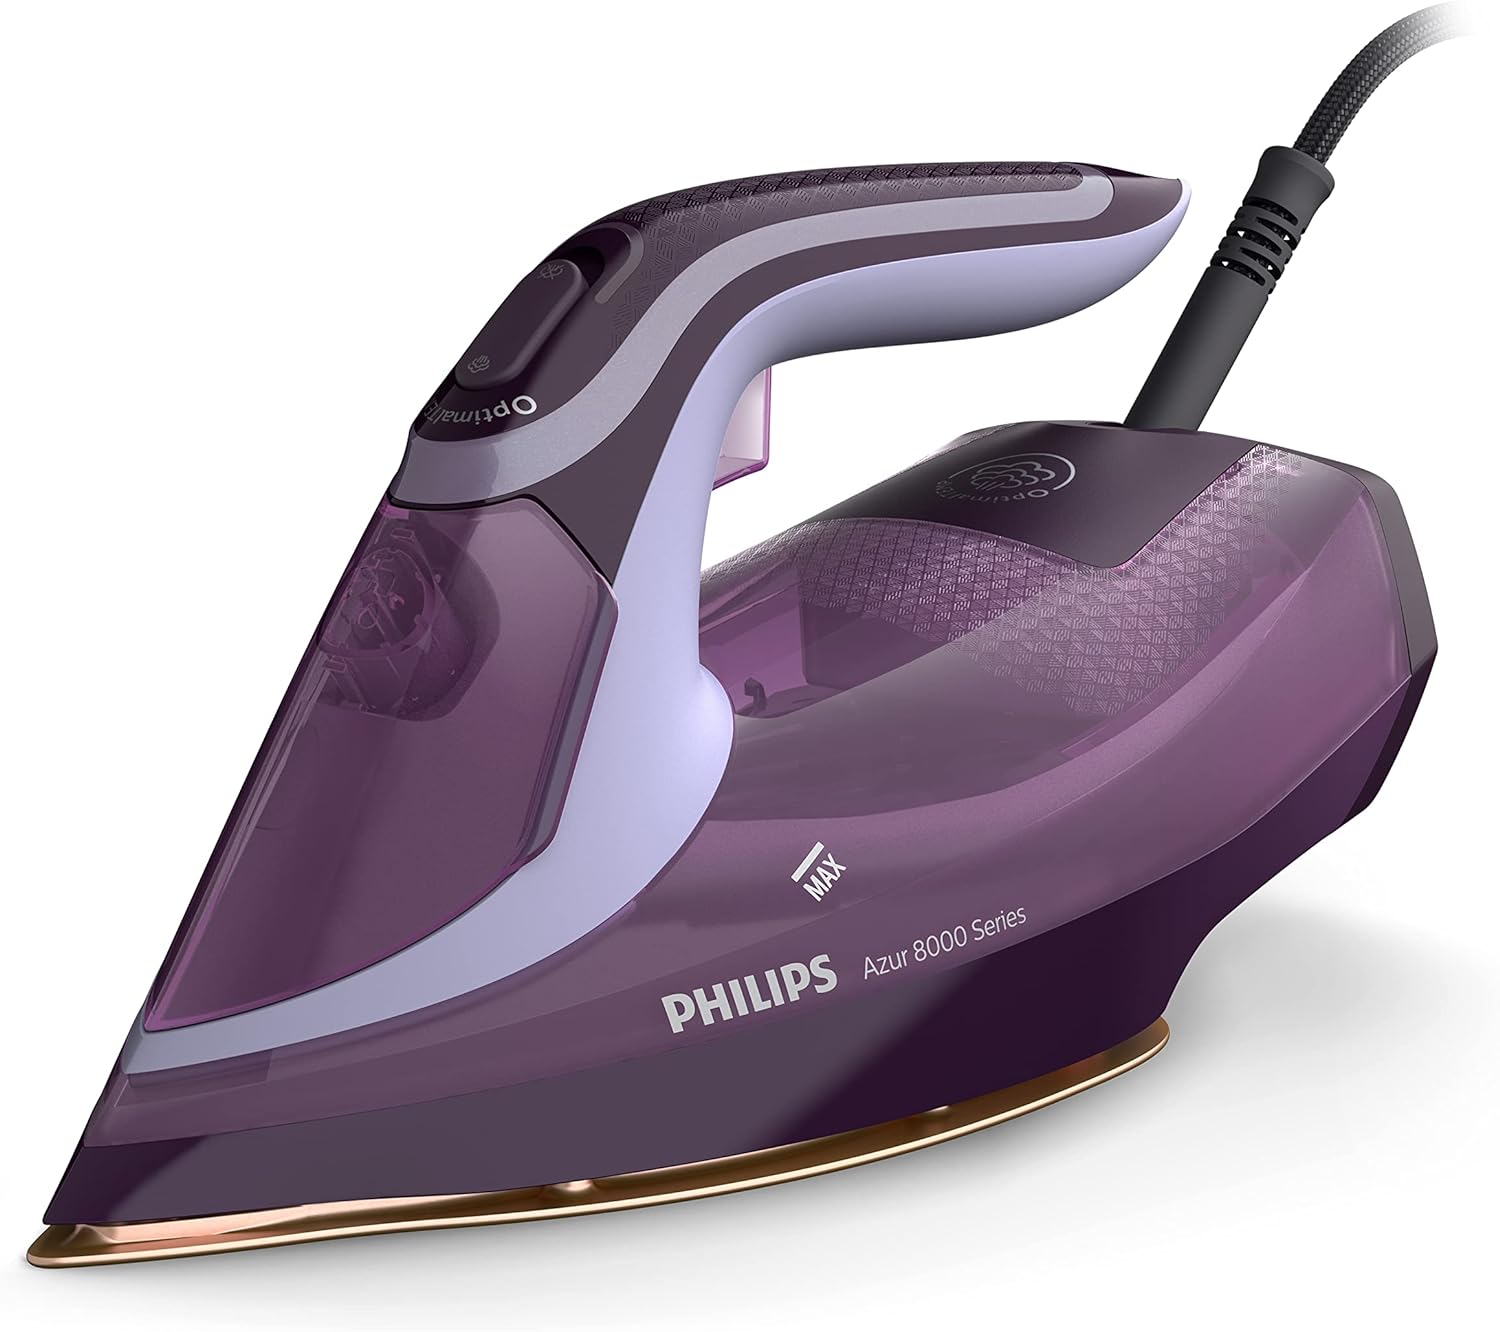 Philips Steam Iron 2500W - GC3920 | Supply Master Accra, Ghana Electric Iron Buy Tools hardware Building materials